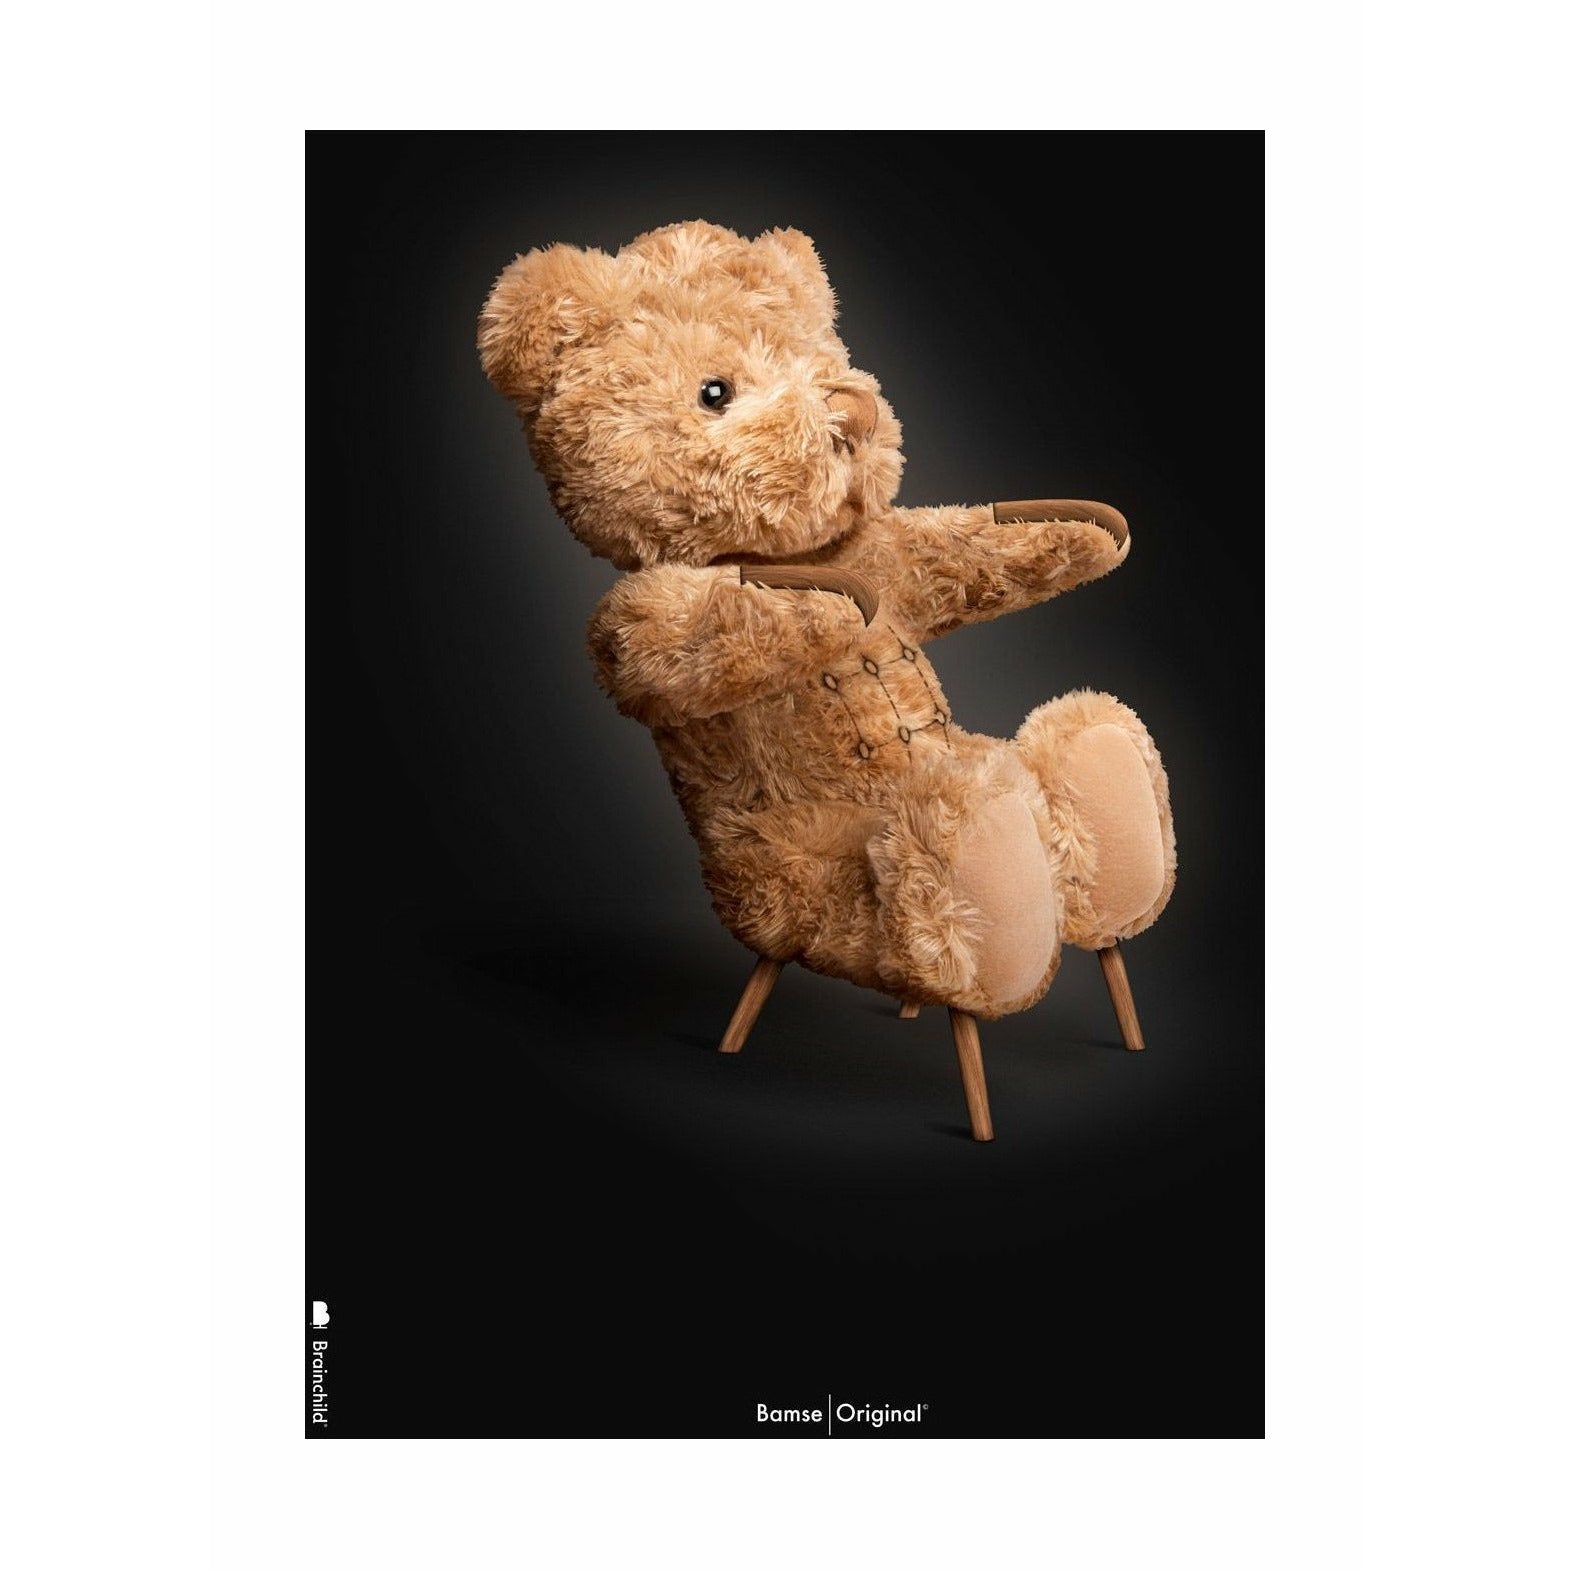 Brainchild Teddy Bear Classic Poster Without Frame A5, Black Background